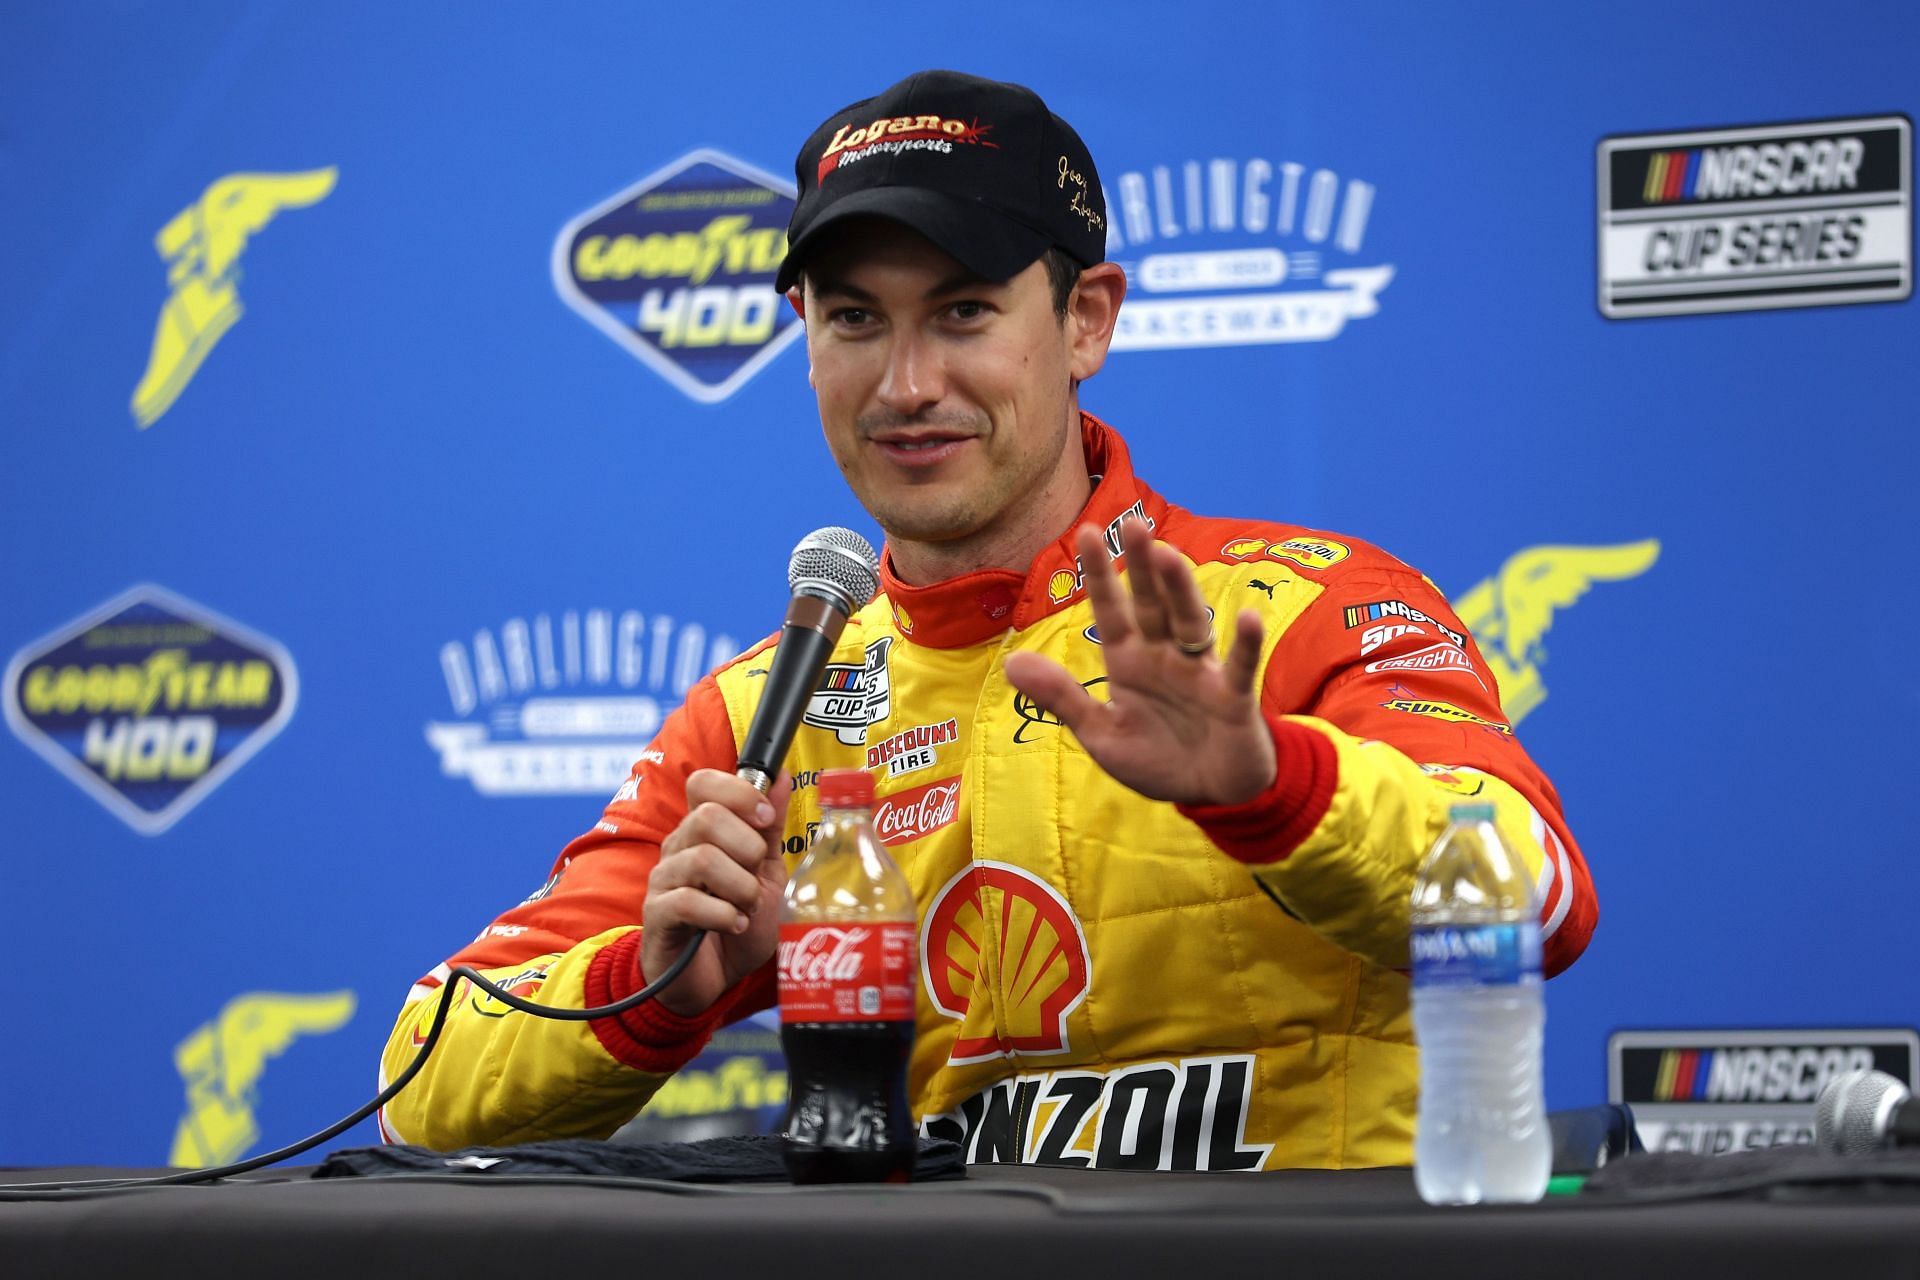 Joey Logano speaks to the media after winning the NASCAR Cup Series Goodyear 400 at Darlington Raceway.